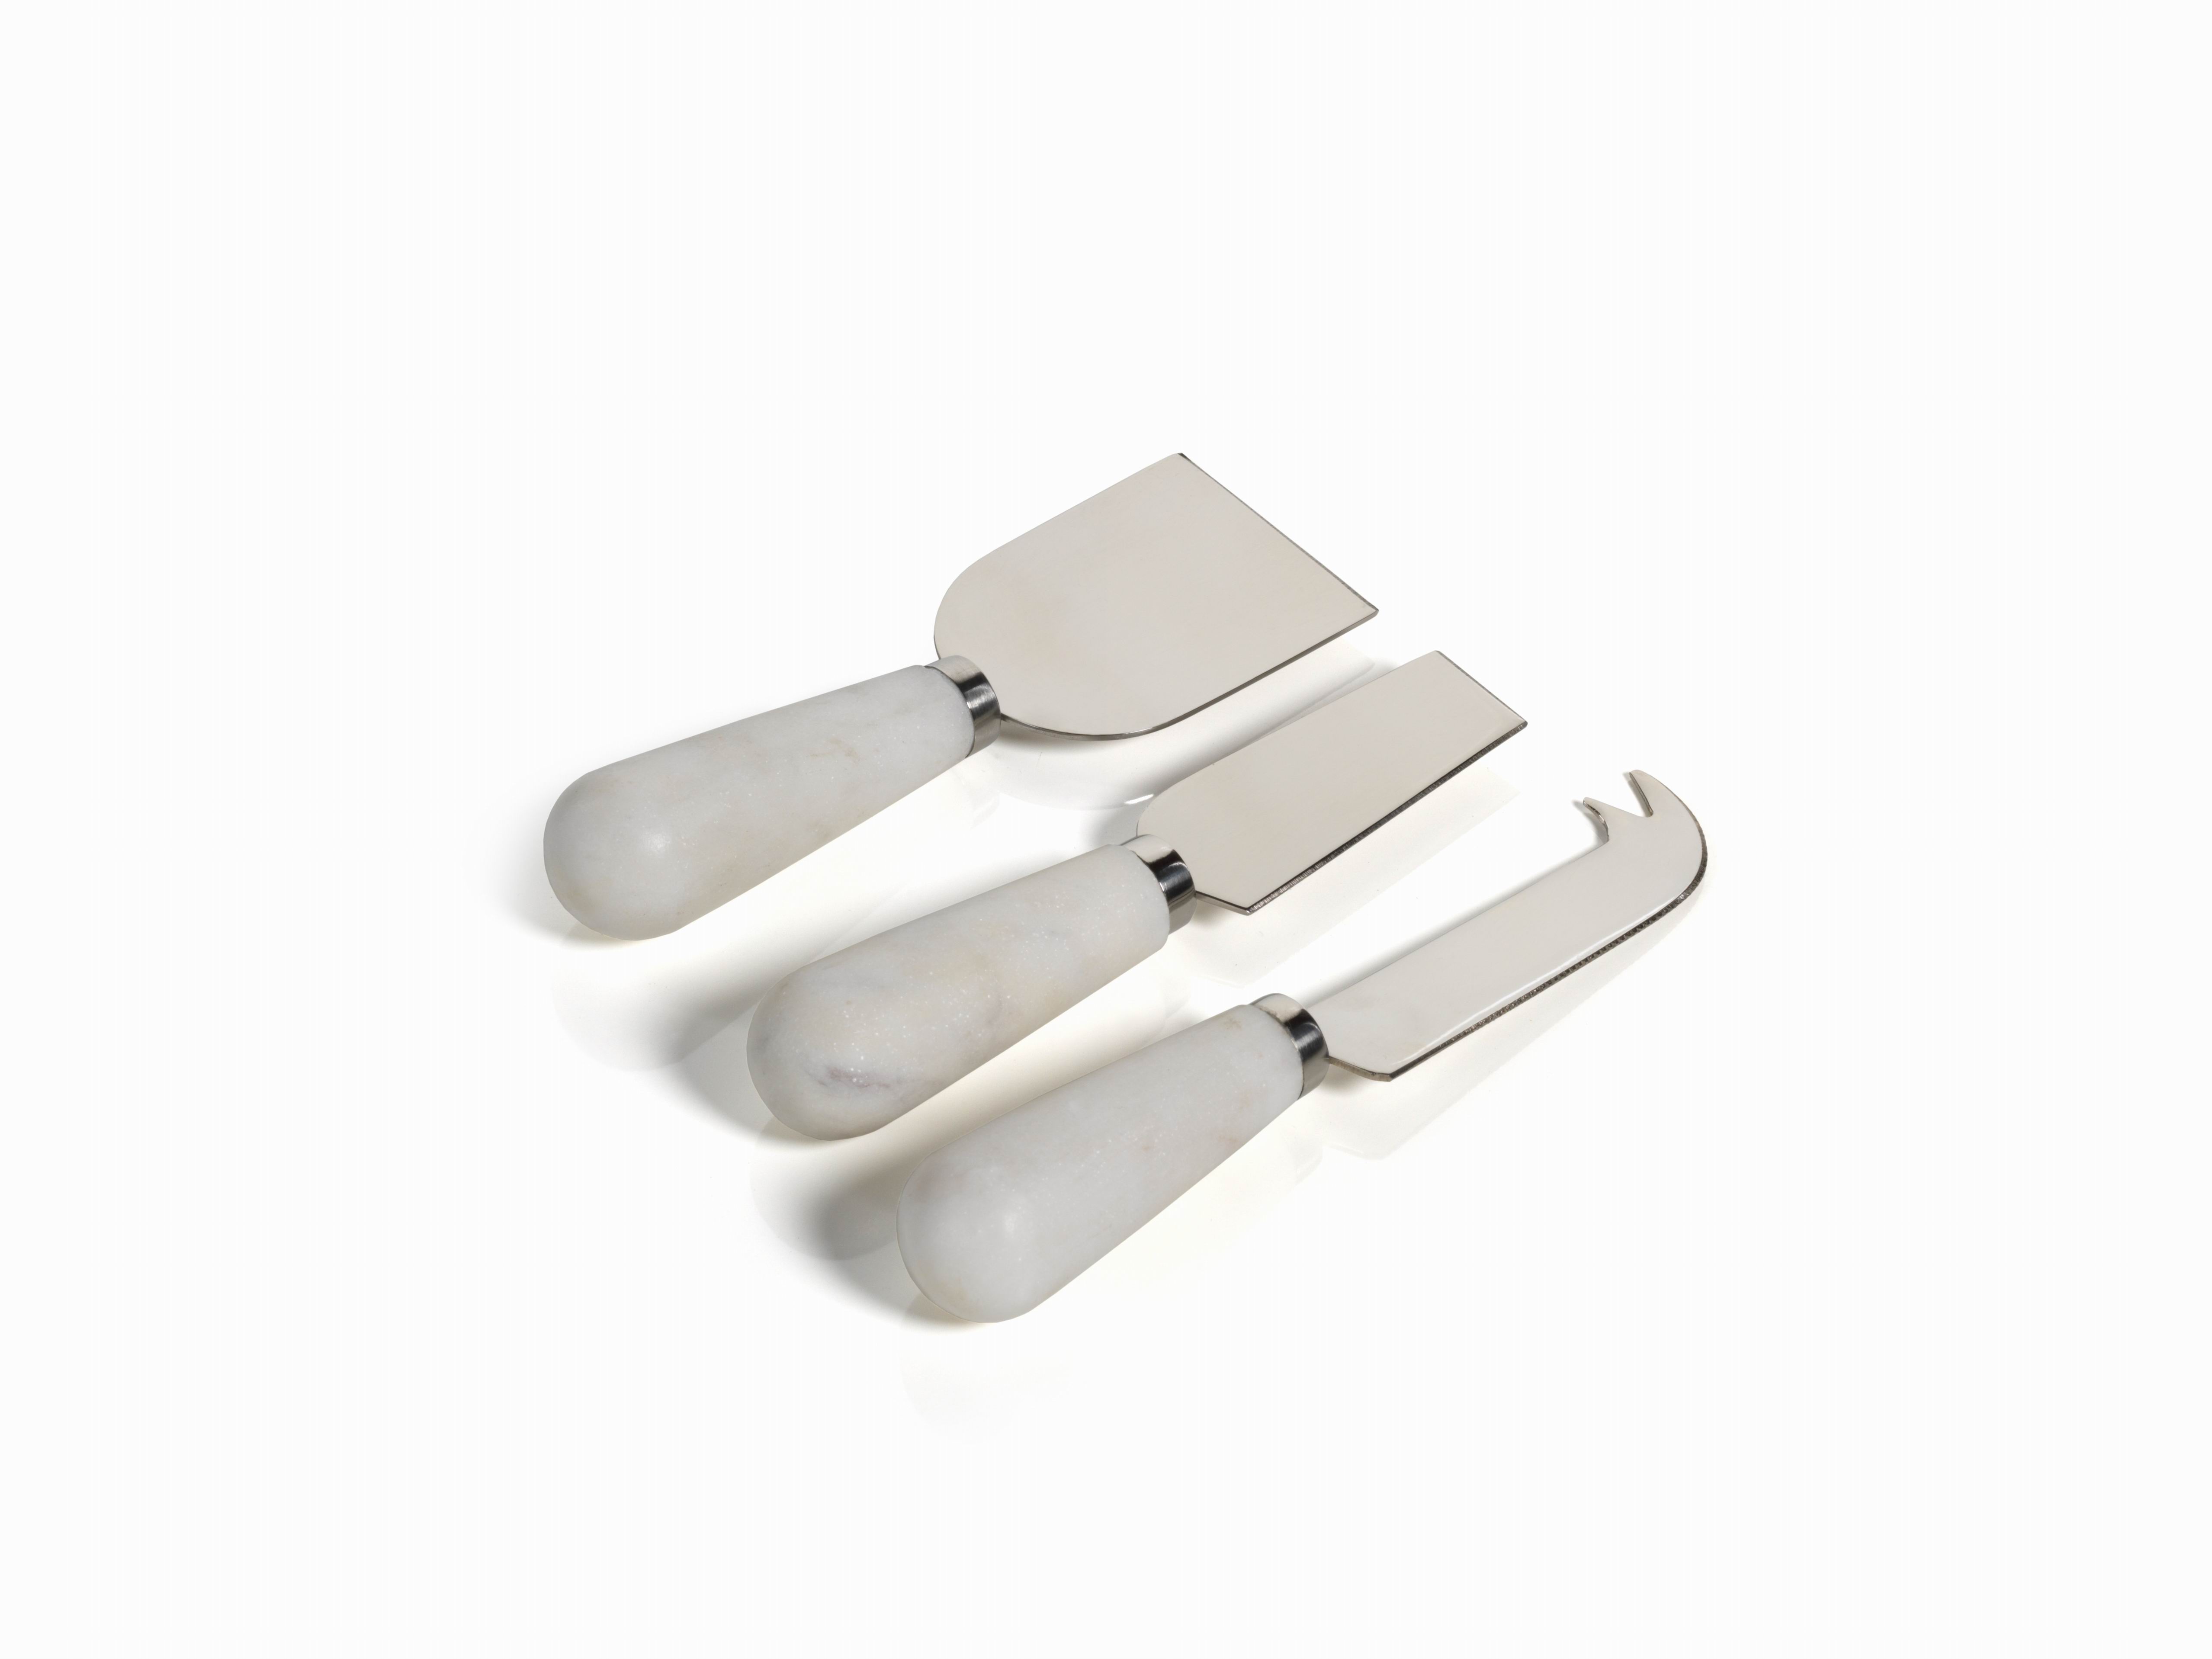 Marble Cheese Tool Set - CARLYLE AVENUE